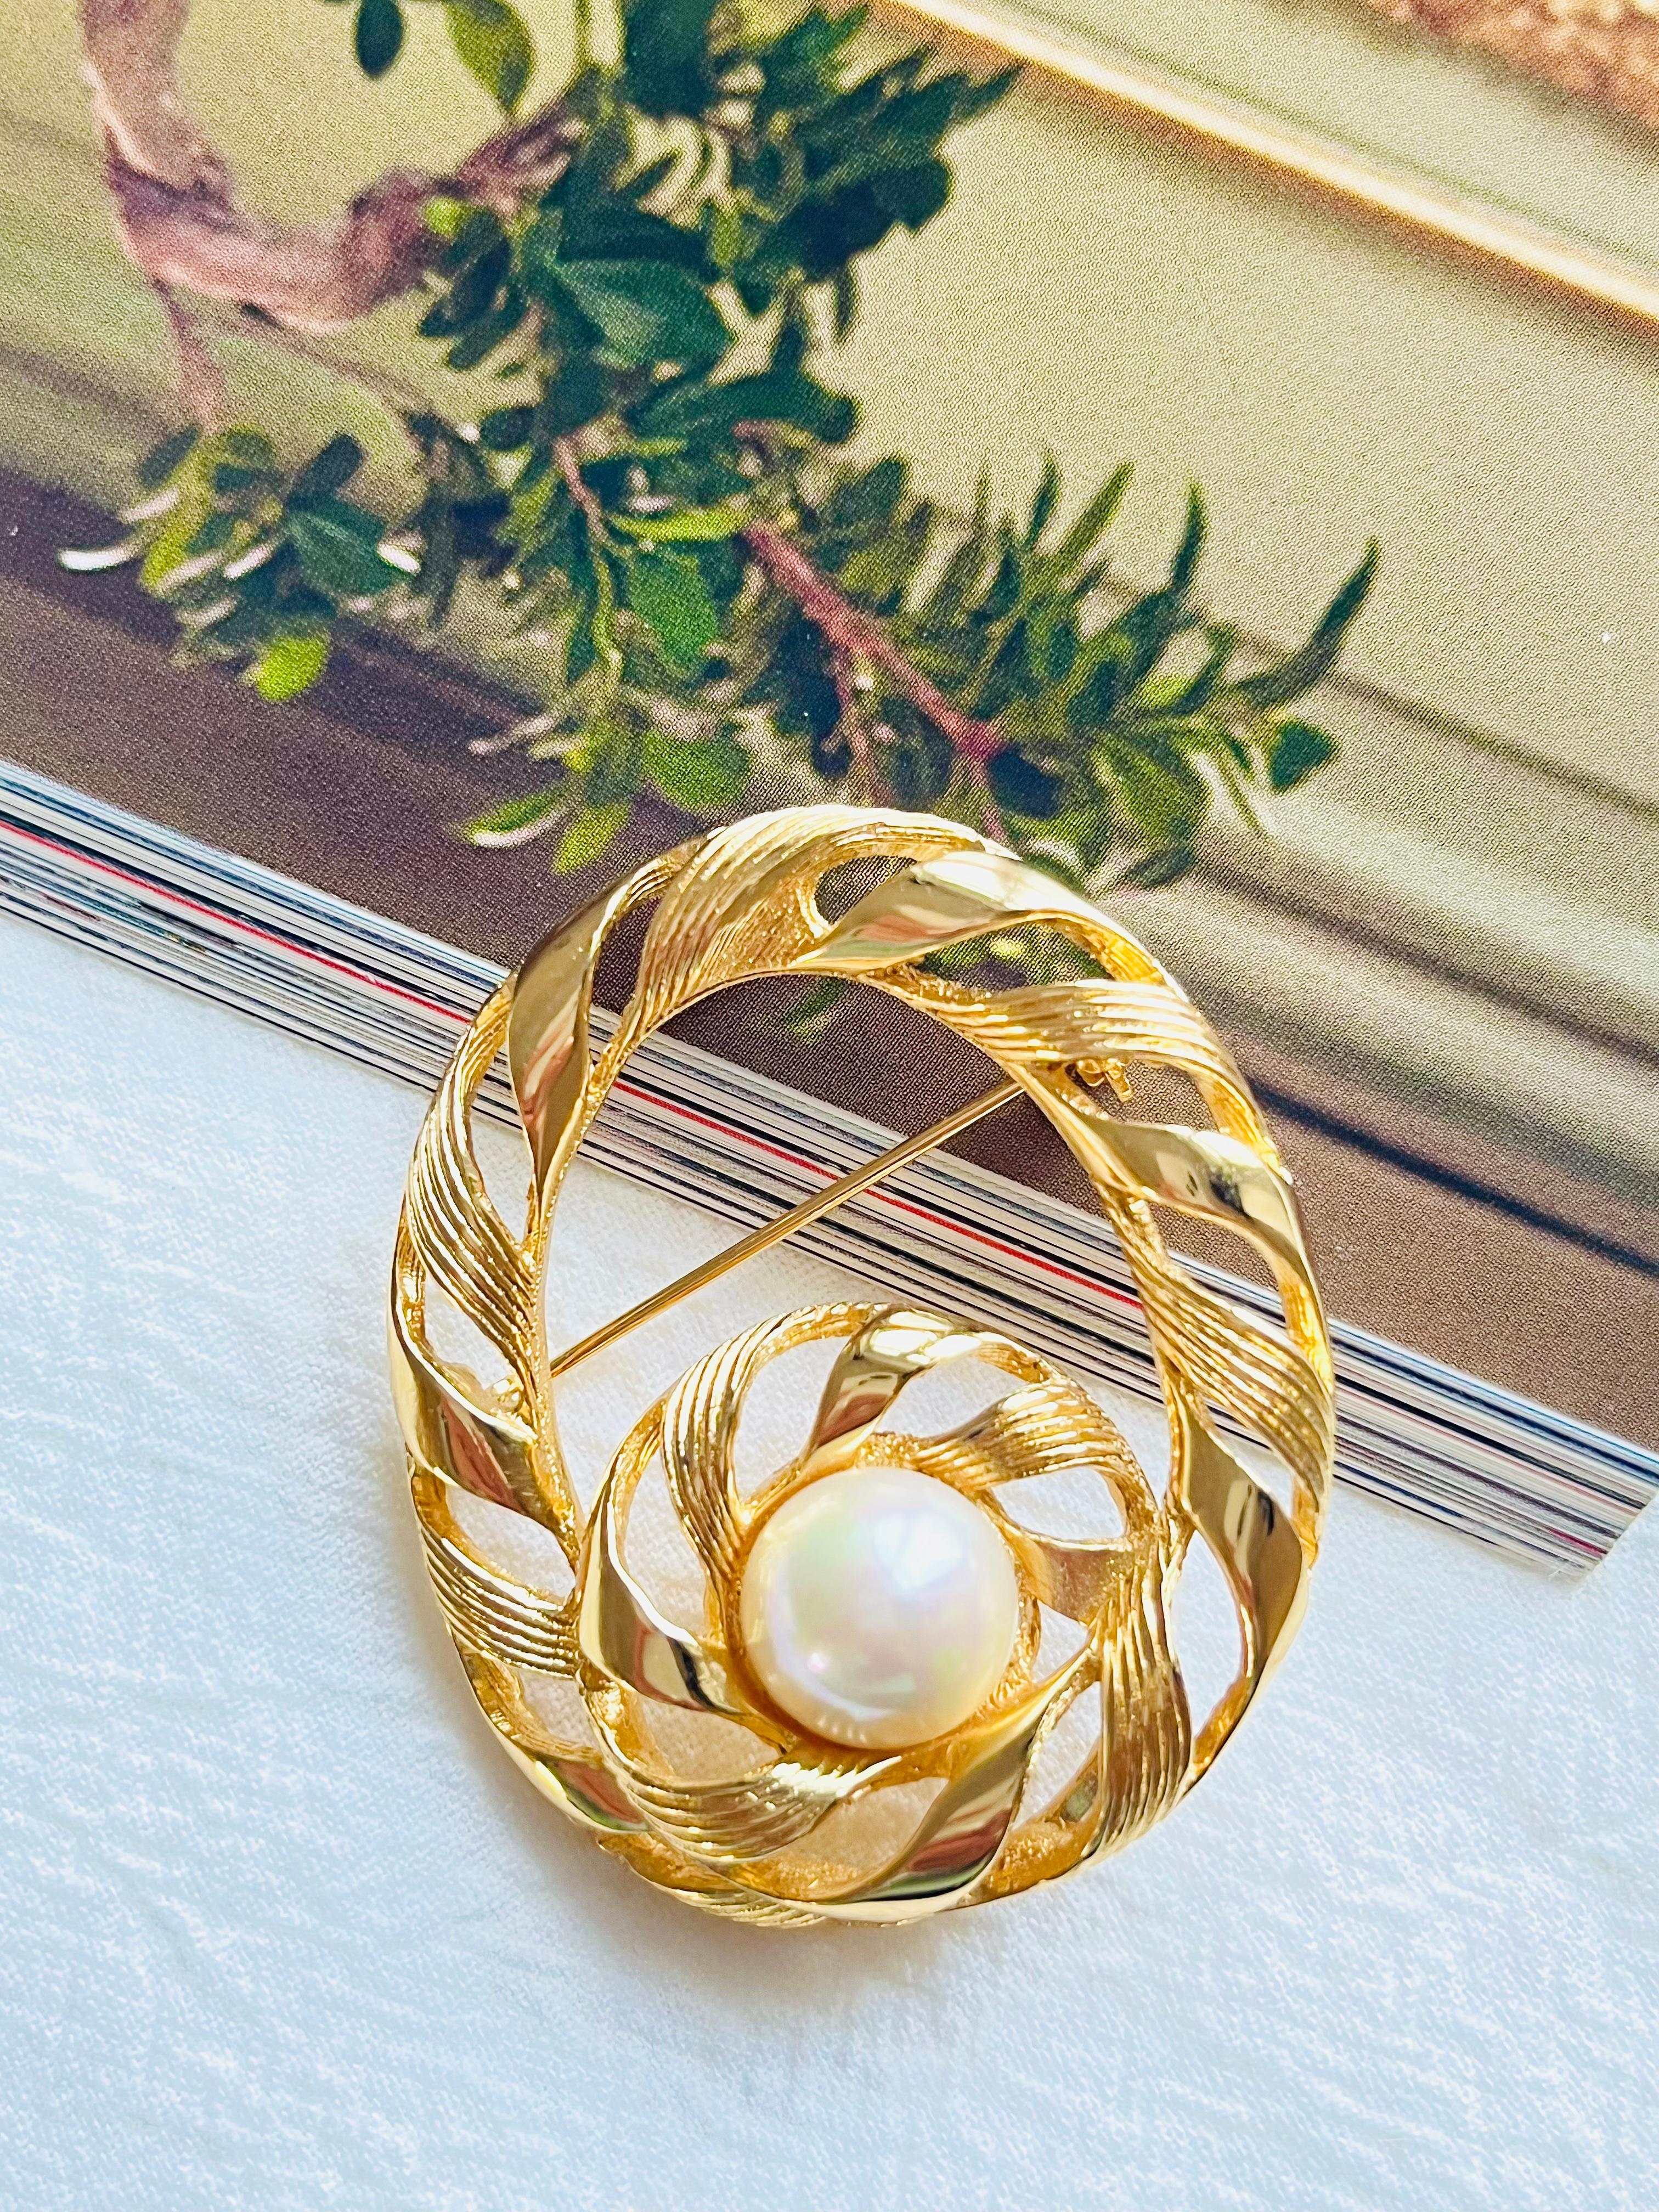 Very excellent condition. 100% genuine.

A unique piece. This is gold plated stylised brooch.

Safety-catch pin closure.

Size: 5.0 cm x 4.0 cm.

Weight: 17.0 g.

_ _ _

Great for everyday wear. Come with velvet pouch and beautiful package.

Makes